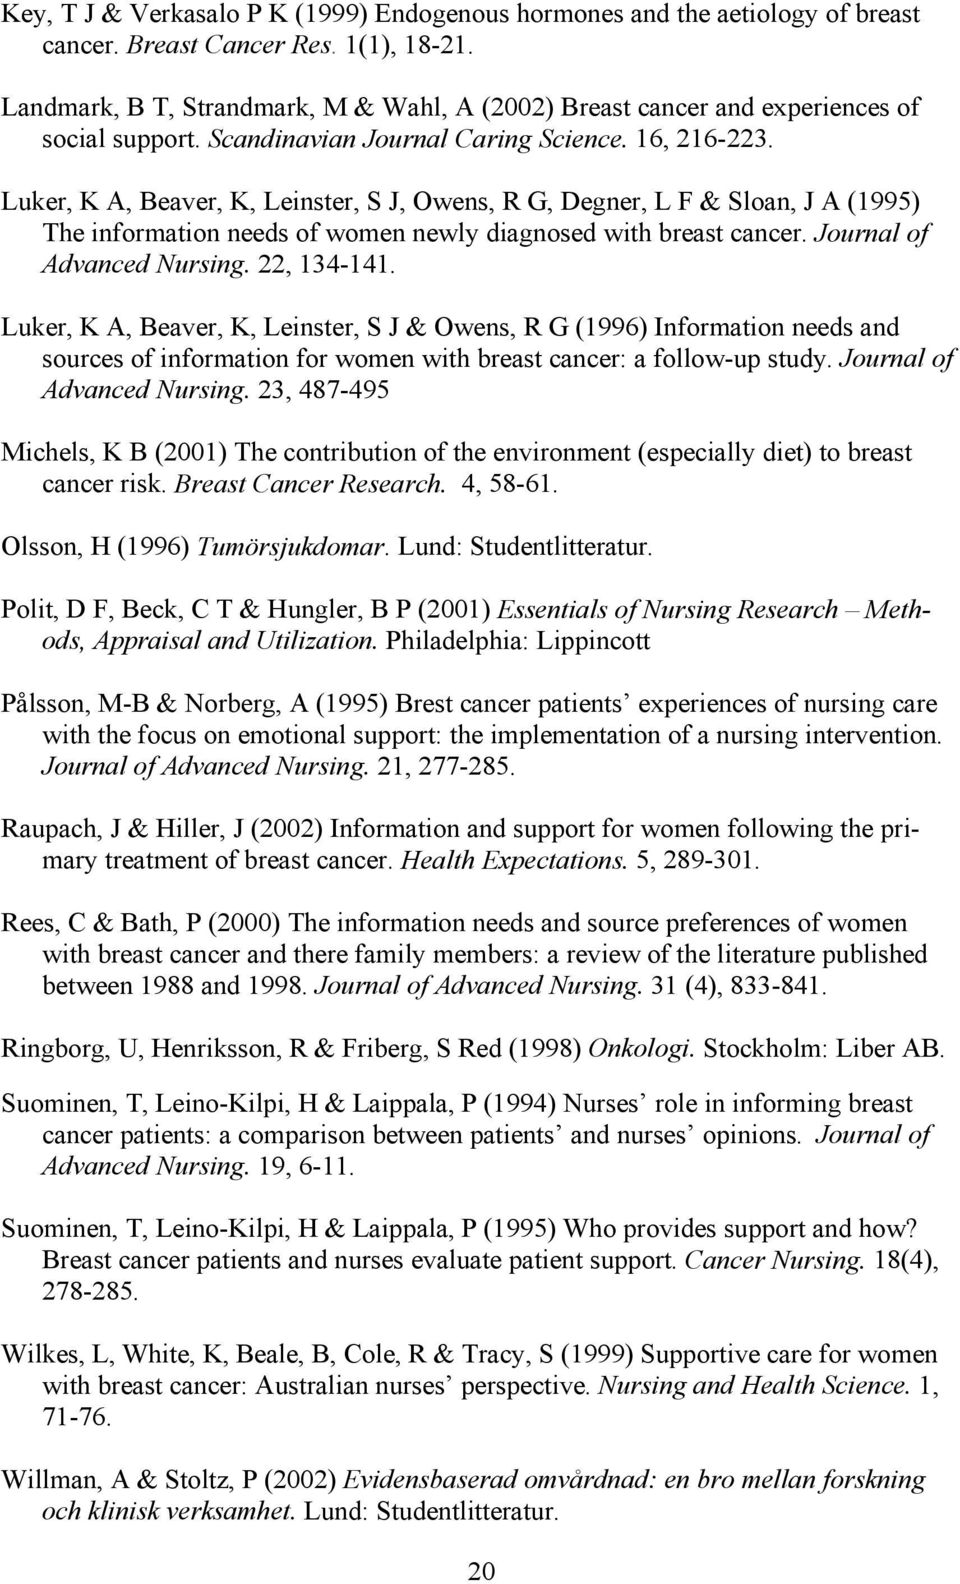 Luker, K A, Beaver, K, Leinster, S J, Owens, R G, Degner, L F & Sloan, J A (1995) The information needs of women newly diagnosed with breast cancer. Journal of Advanced Nursing. 22, 14-141.